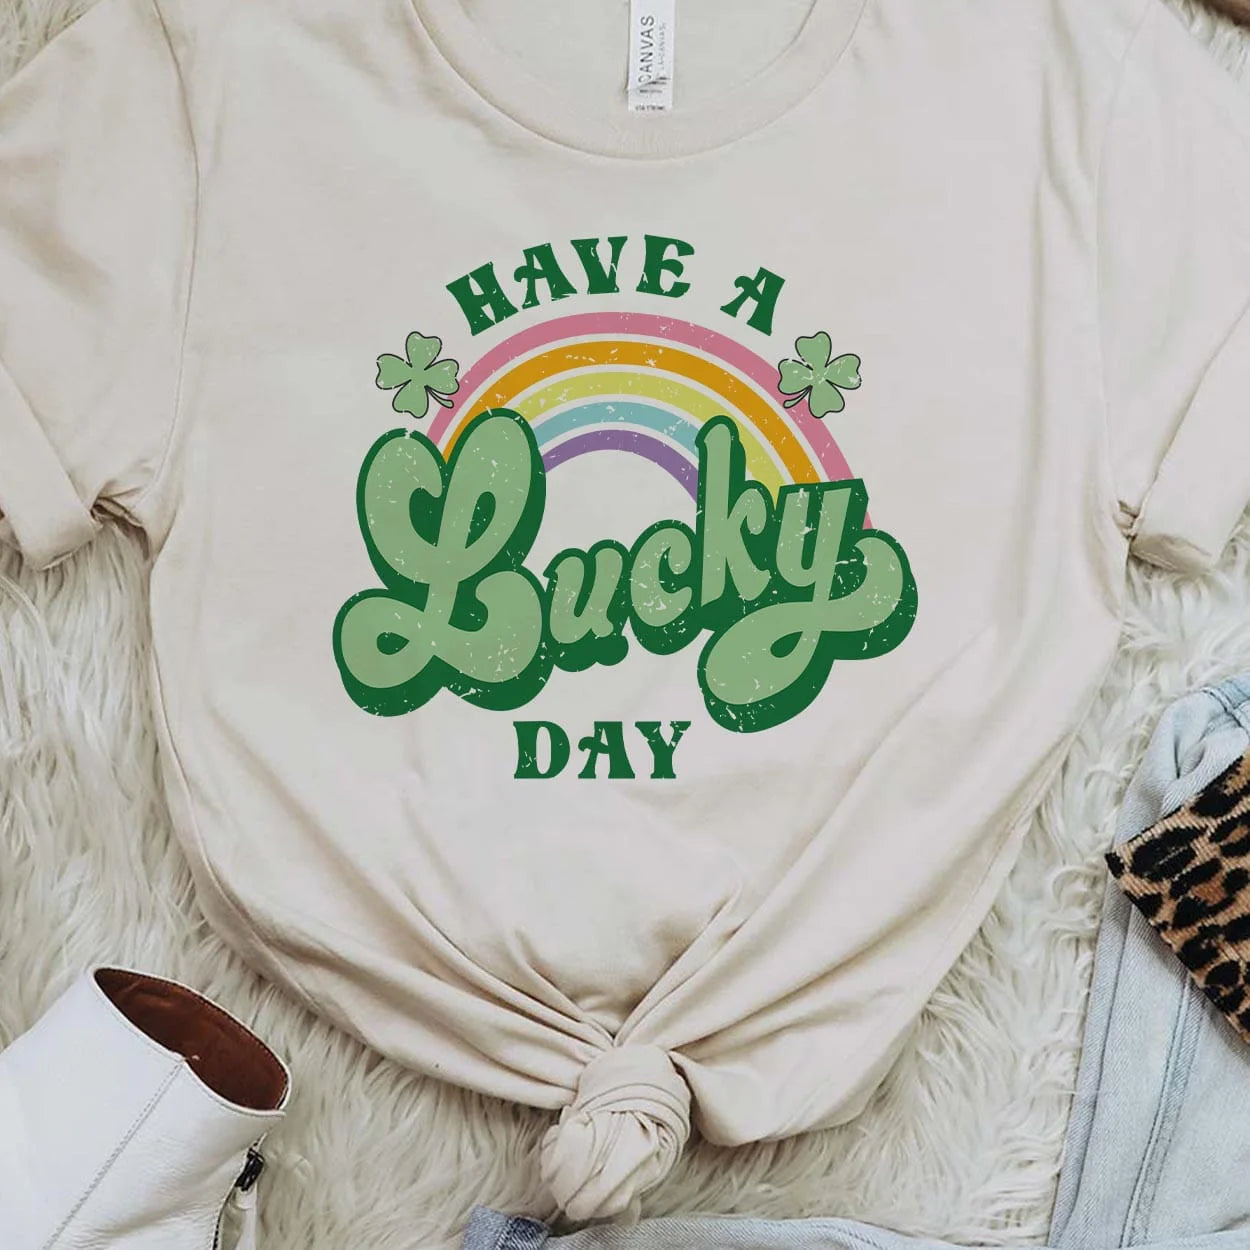 A cream short sleeve shirt featuring the words "Have a lucky day" with a rainbow going through the middle with clovers. The word "lucky" is in cursive and a larger font. Item is pictured in a white background.